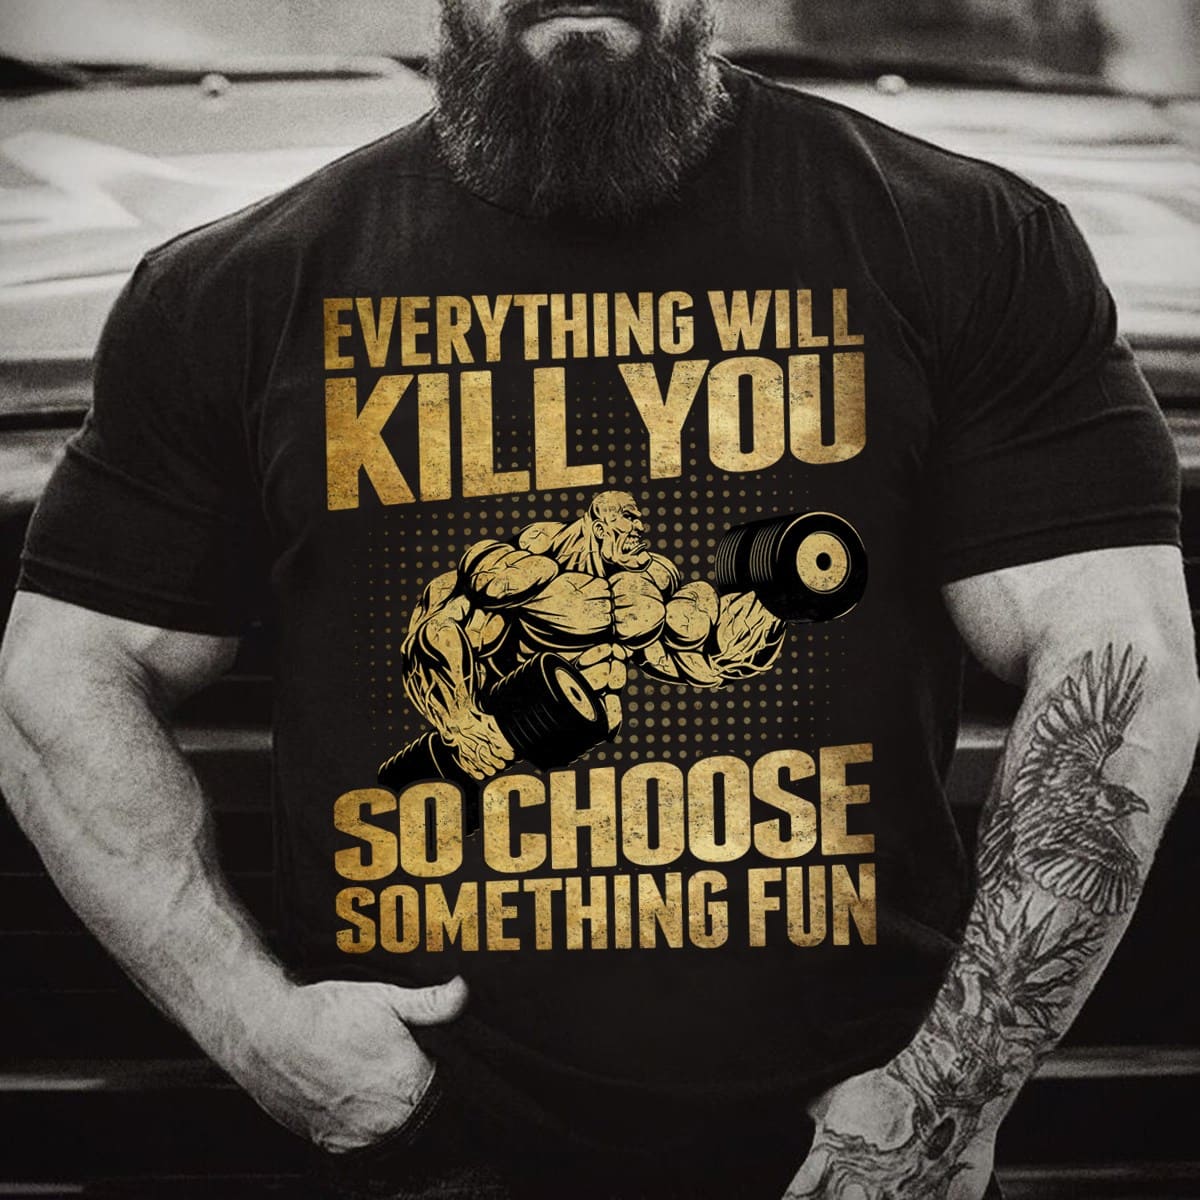 Every will kill you so choose something fun - Big muscle man, strong man lifting weight